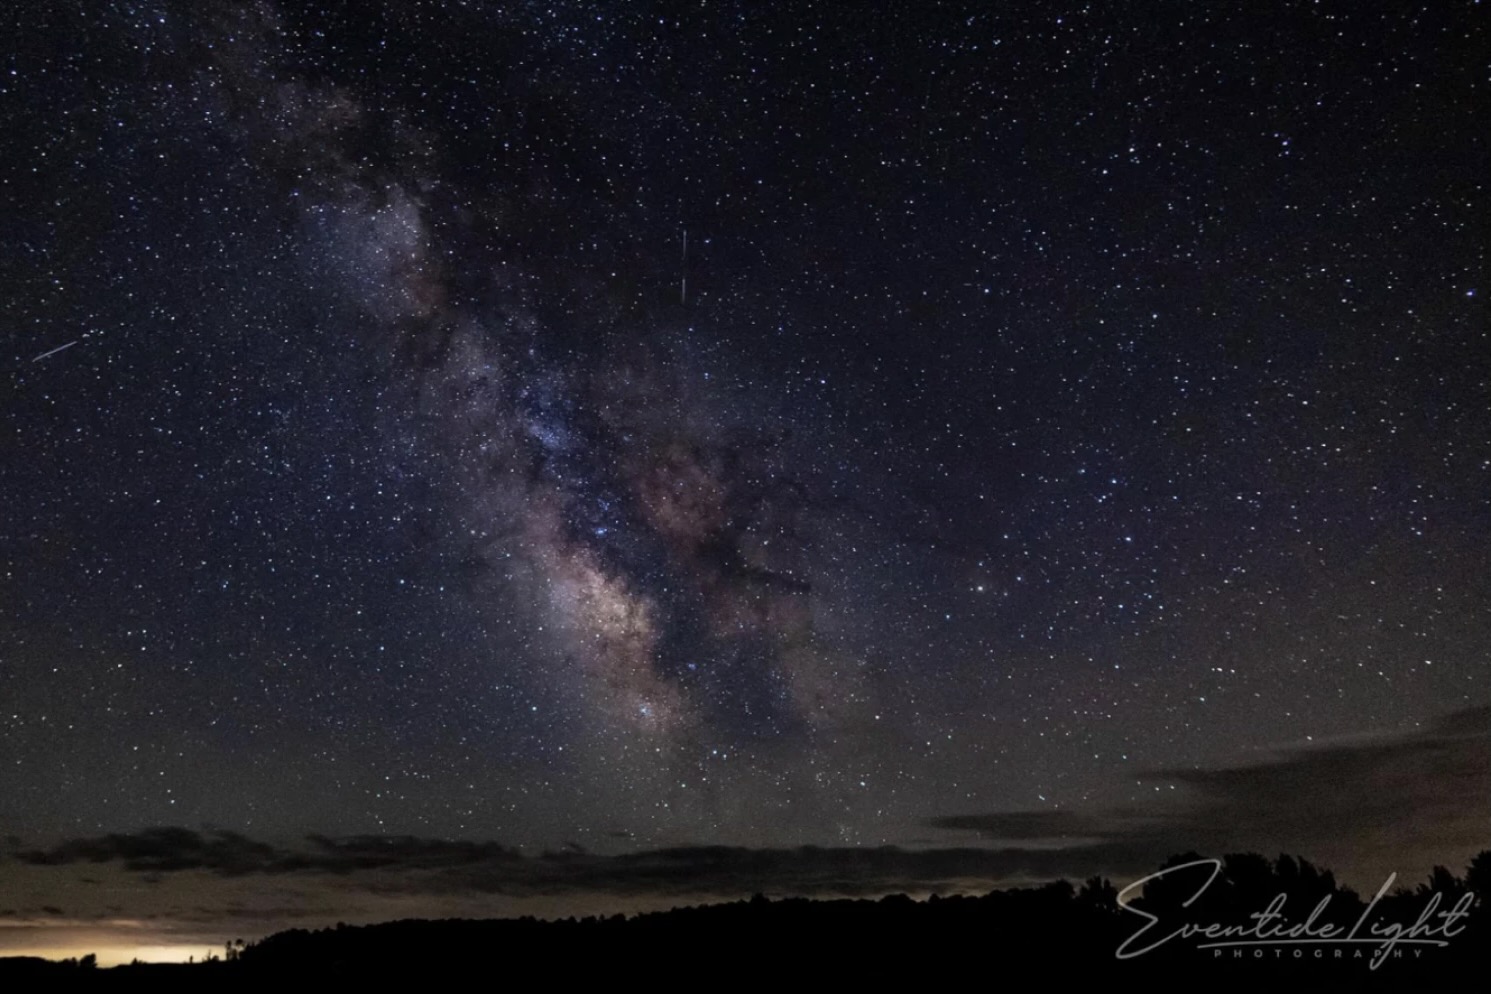 The Milky Way is visible in the night sky.